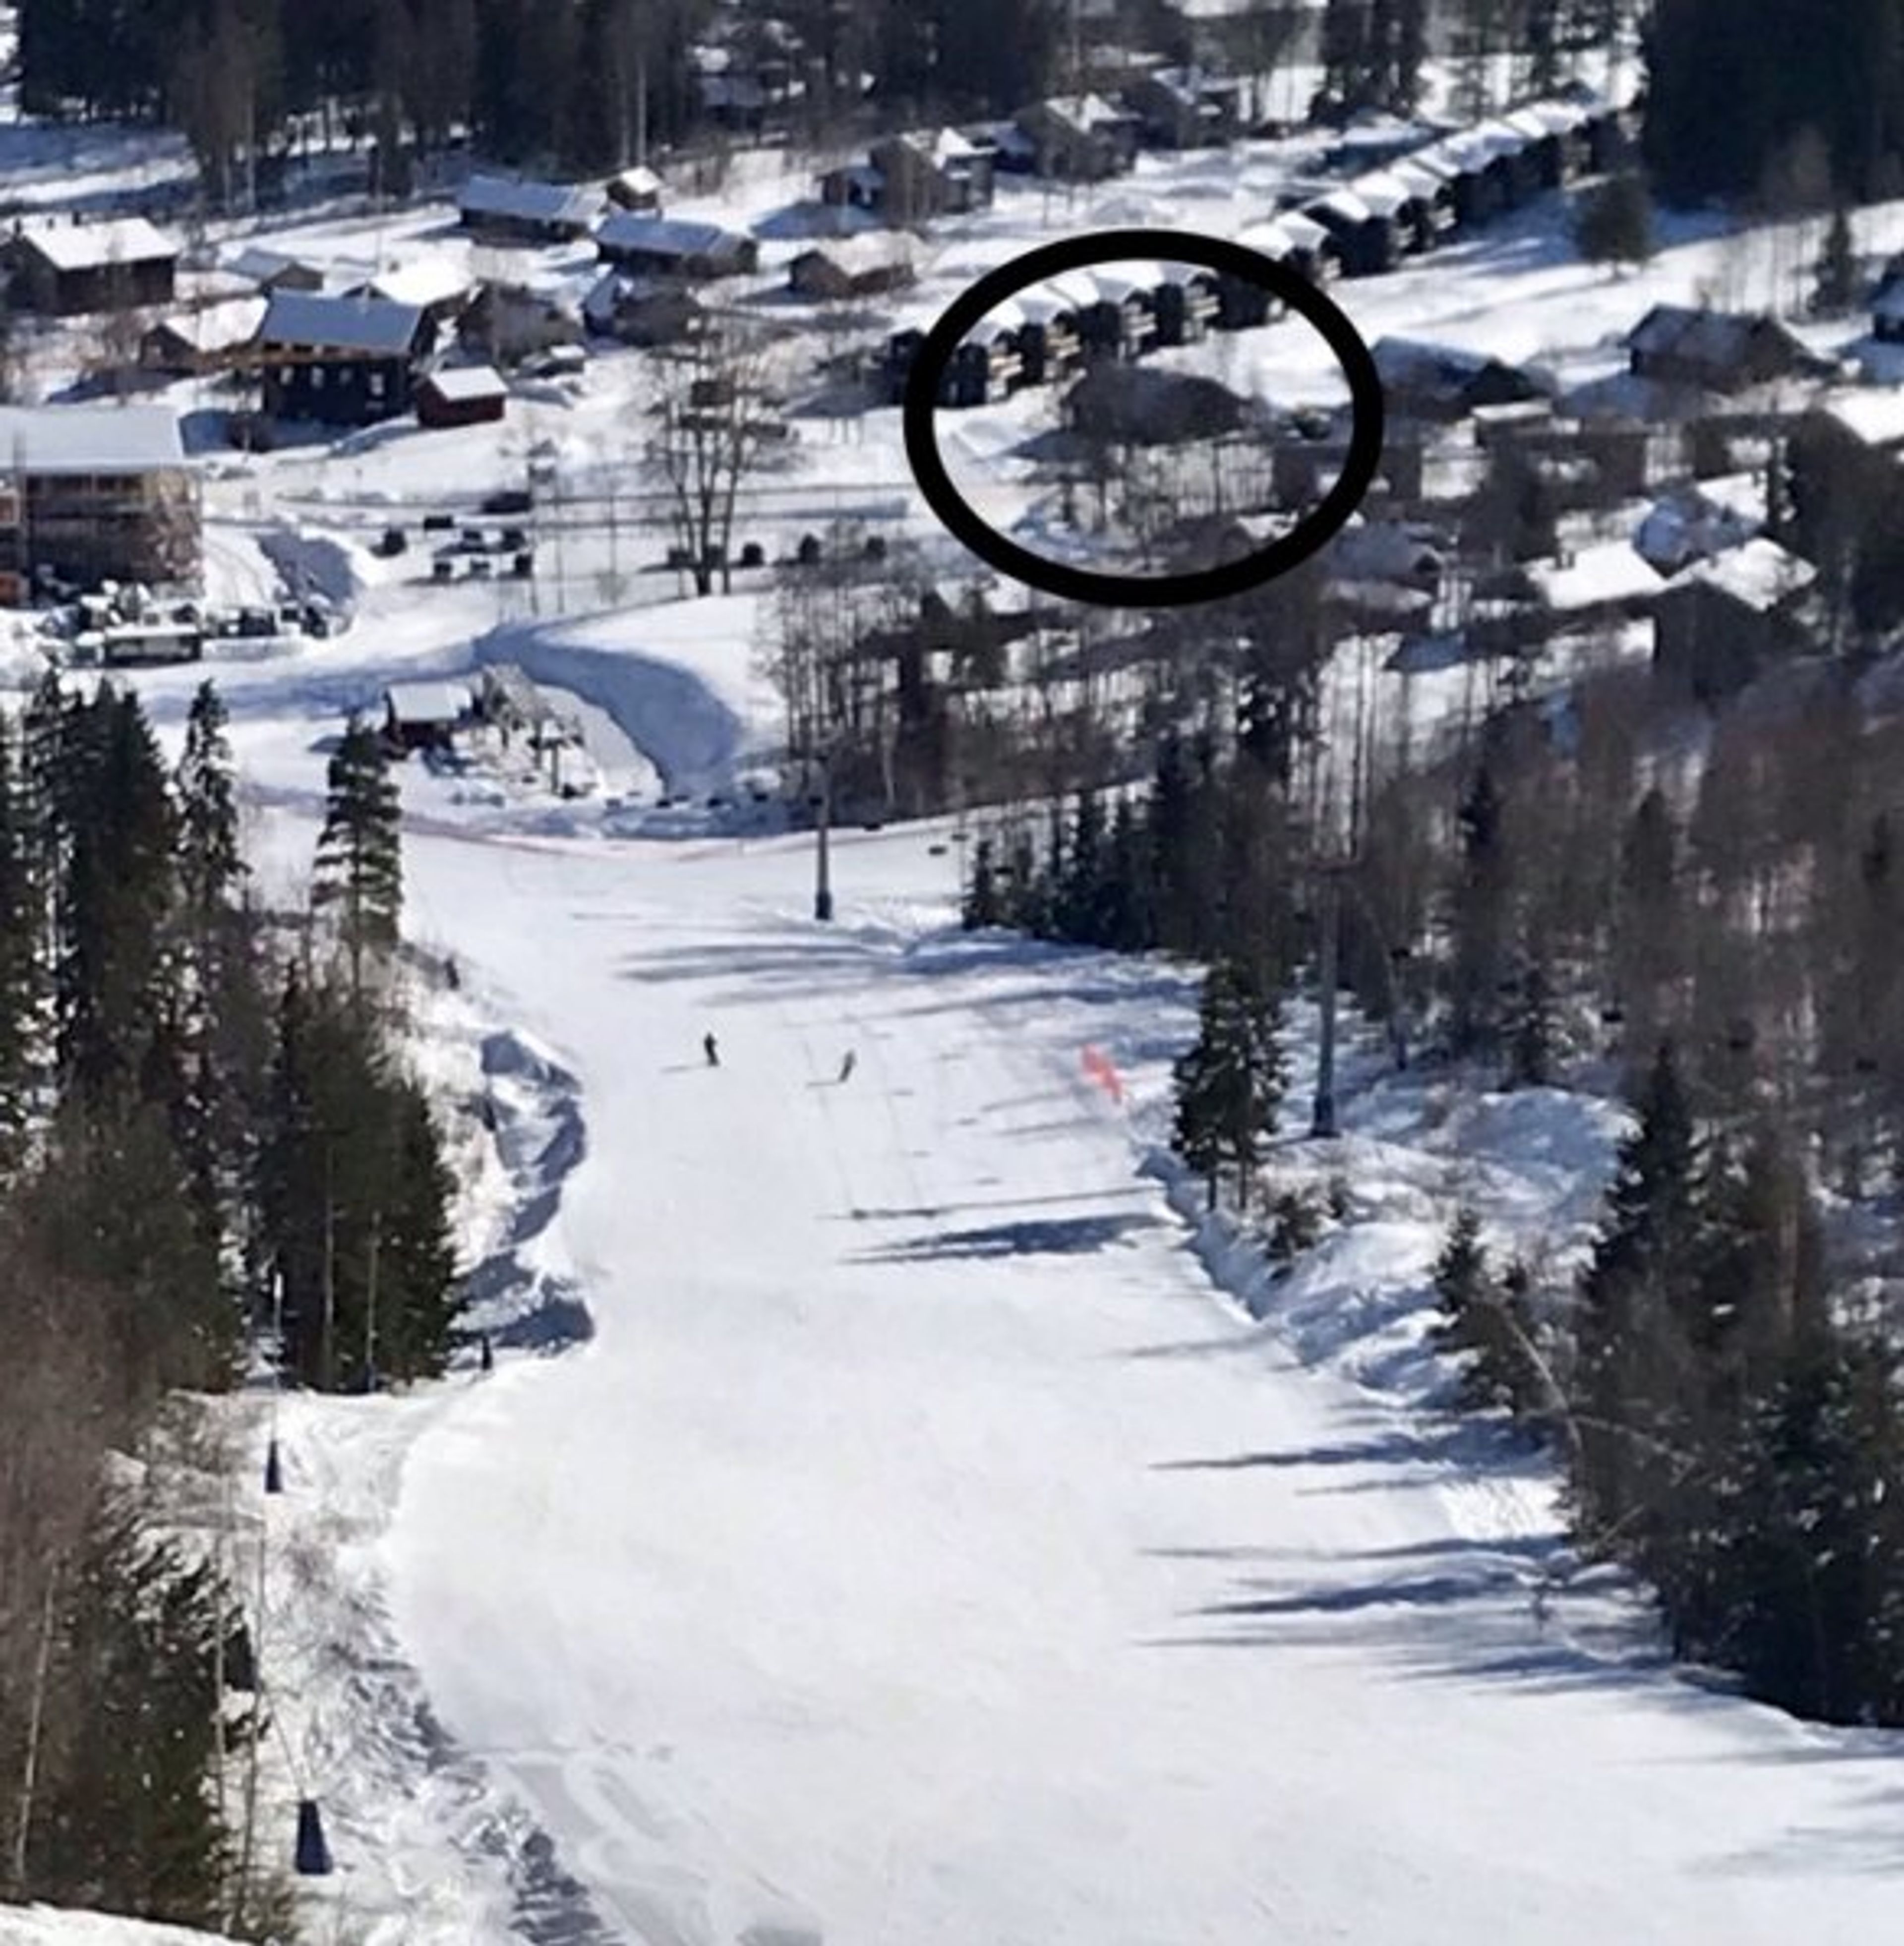 The view of the house from the slopes.